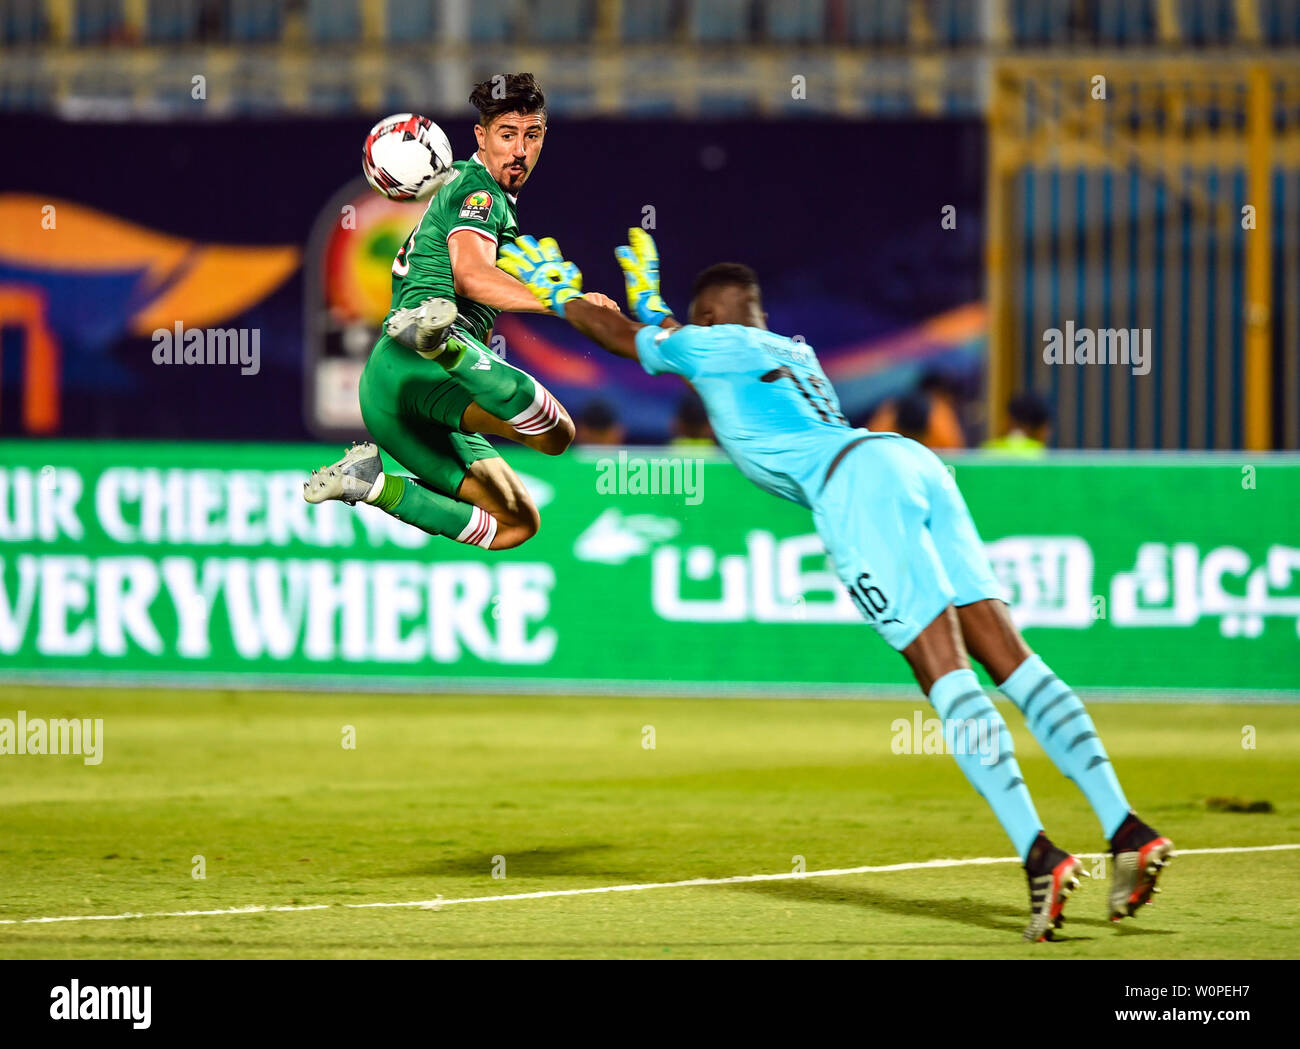 Cairo, Egypt. 27th June, 2019. Baghdad Bounedjah (L) of Algeria competes with Senegal's goalkeeper Edouard Osoque Mendy during the 2019 African Cup of Nations Group C match between Senegal and Algeria in Cairo, Egypt, on June 27, 2019. Algeria won 1-0. Credit: Li Yan/Xinhua/Alamy Live News Stock Photo